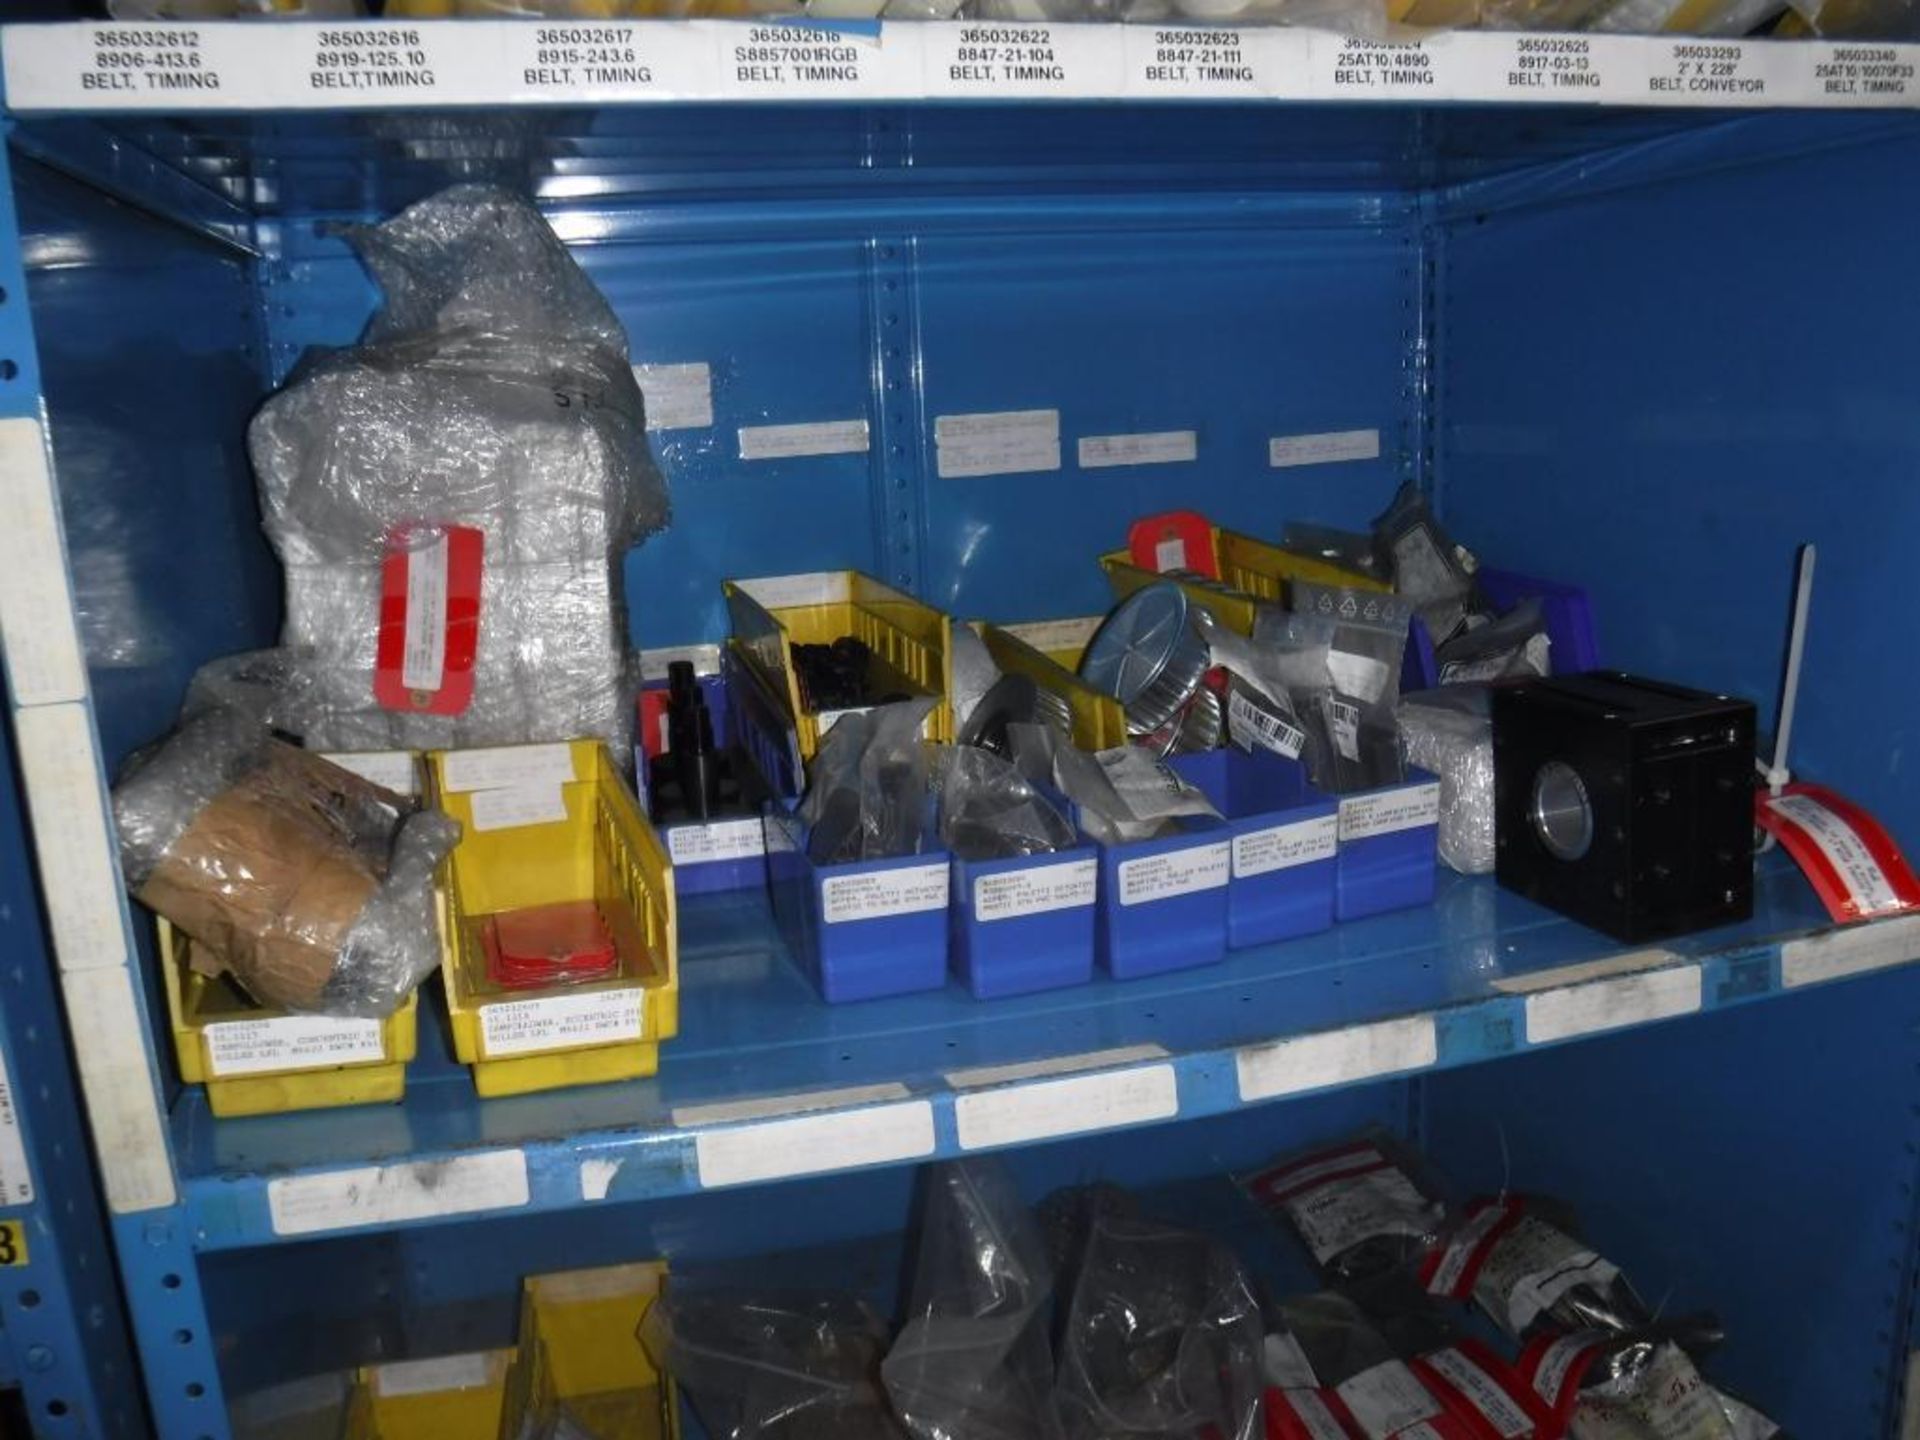 Contents of Shelving 155M Thru 164-5M-Pins,Valves,Shafts,Socket,Actuator,Idler Wheel,Wire Carrier,Ai - Image 25 of 33